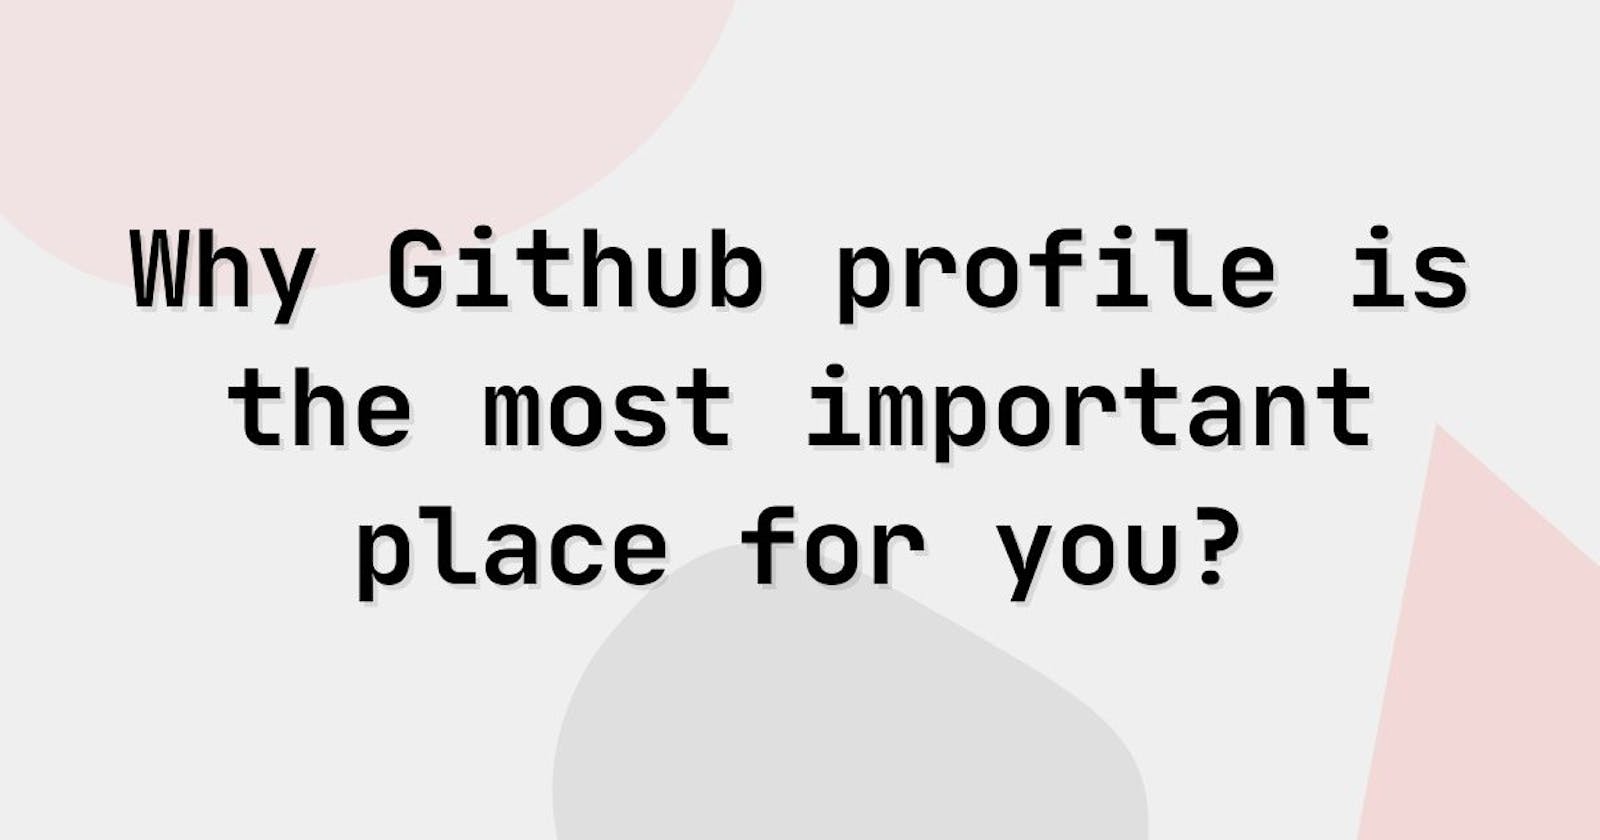 Github page is the most important place as a developer and here is why it is so important